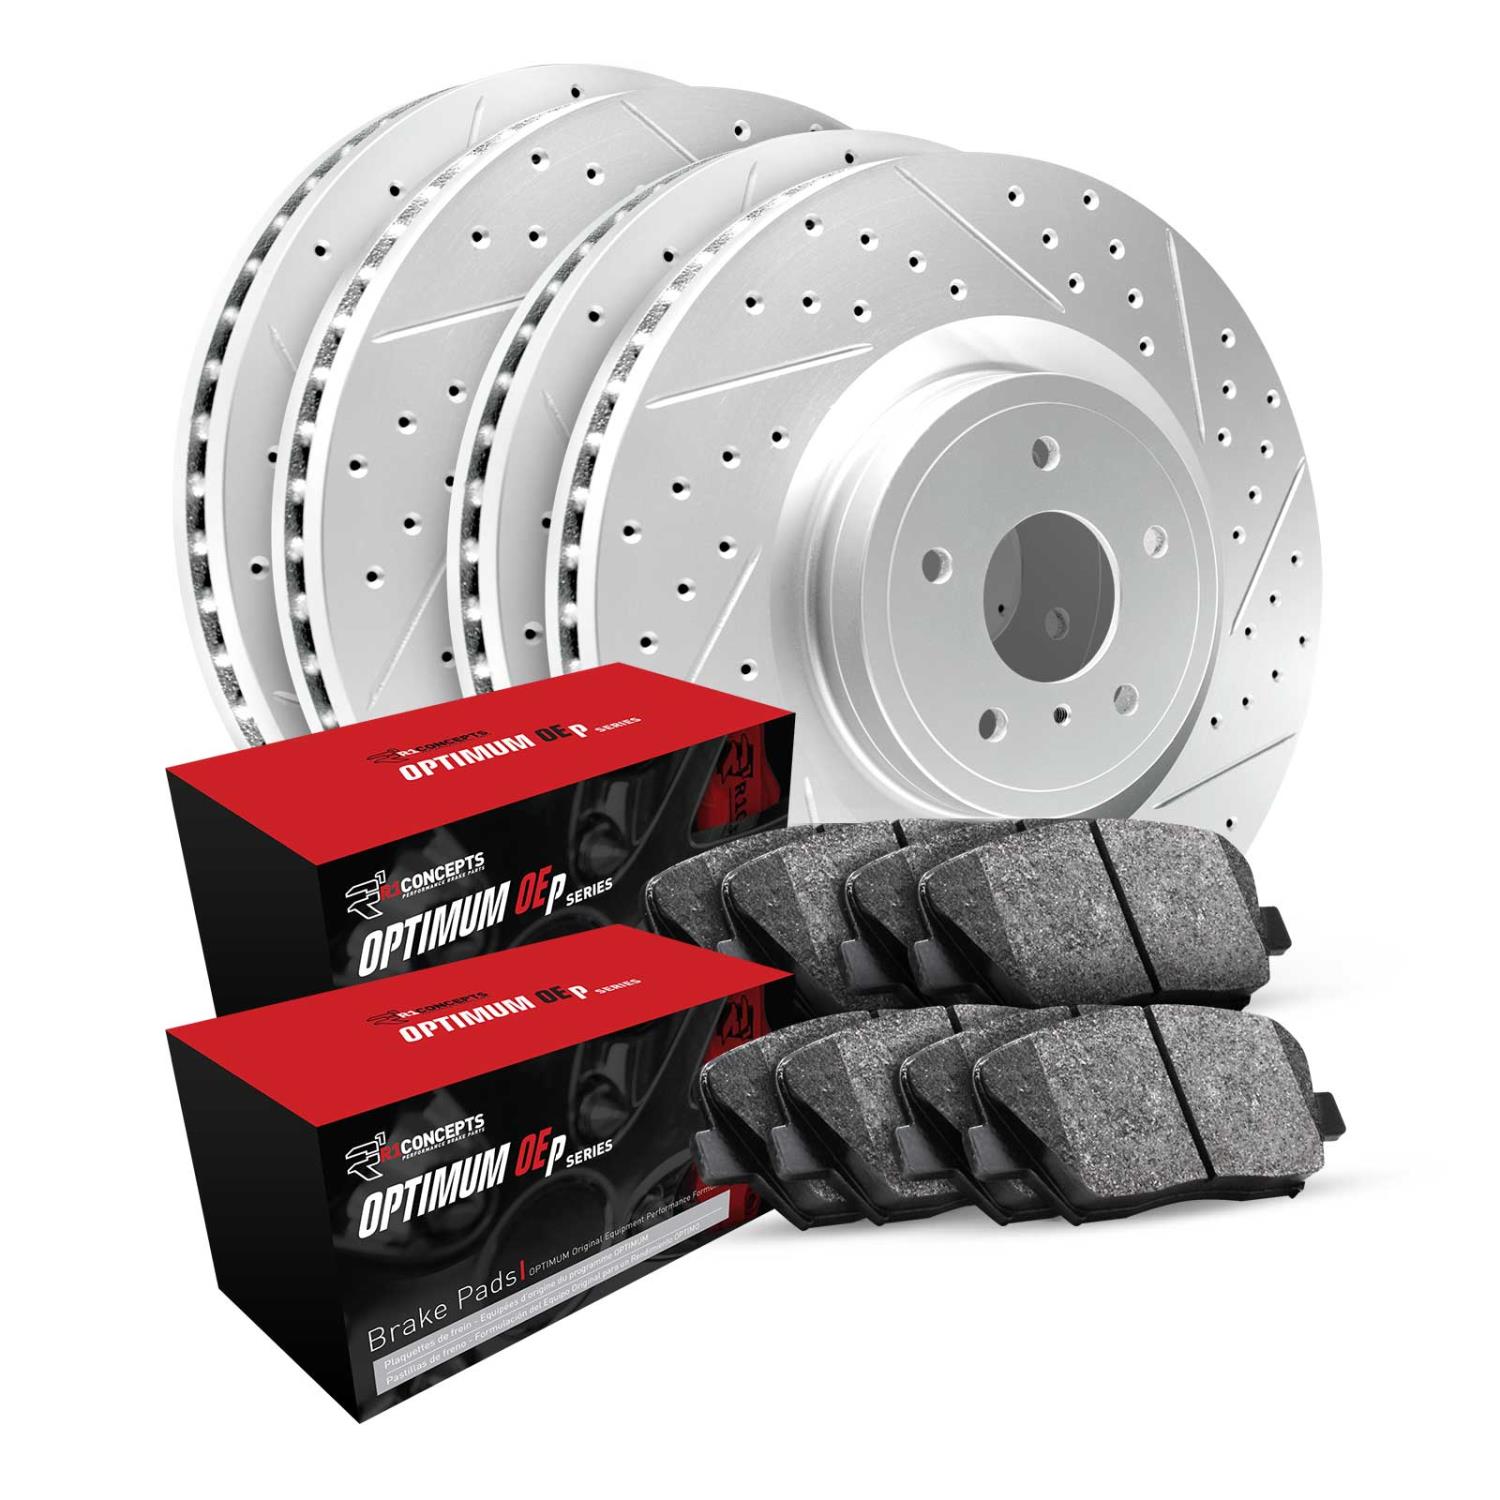 GEO-Carbon Drilled & Slotted Brake Rotor Set w/Optimum OE Pads, 2012-2020 Fits Multiple Makes/Models, Position: Front & Rear